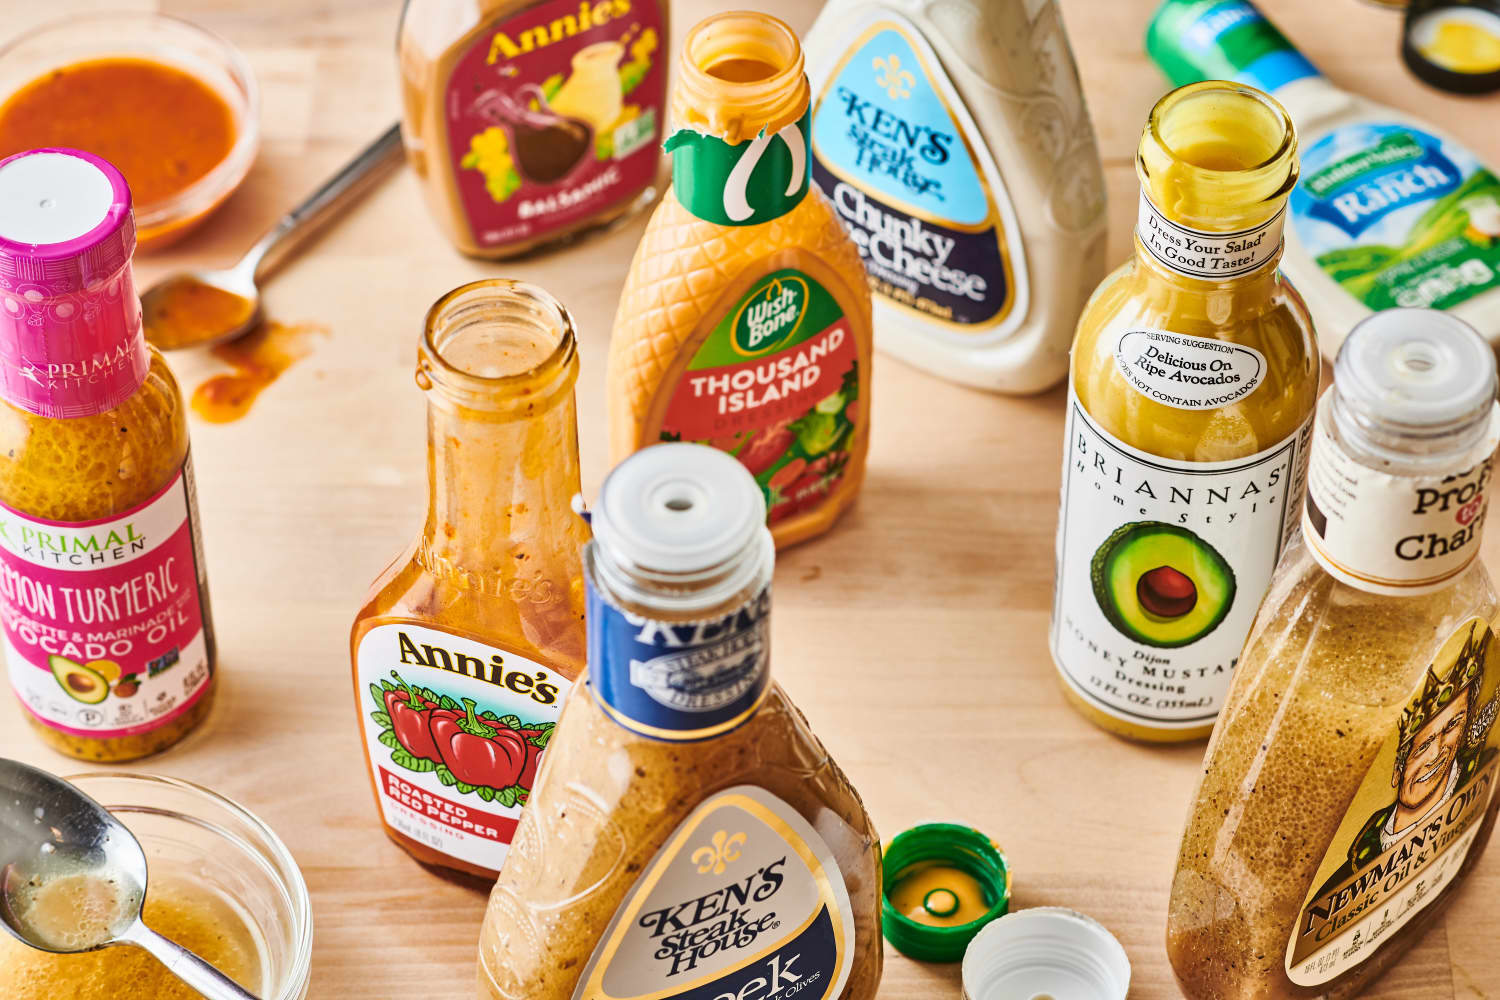 Best Store Bought Caesar Dressing, According to Taste Tests